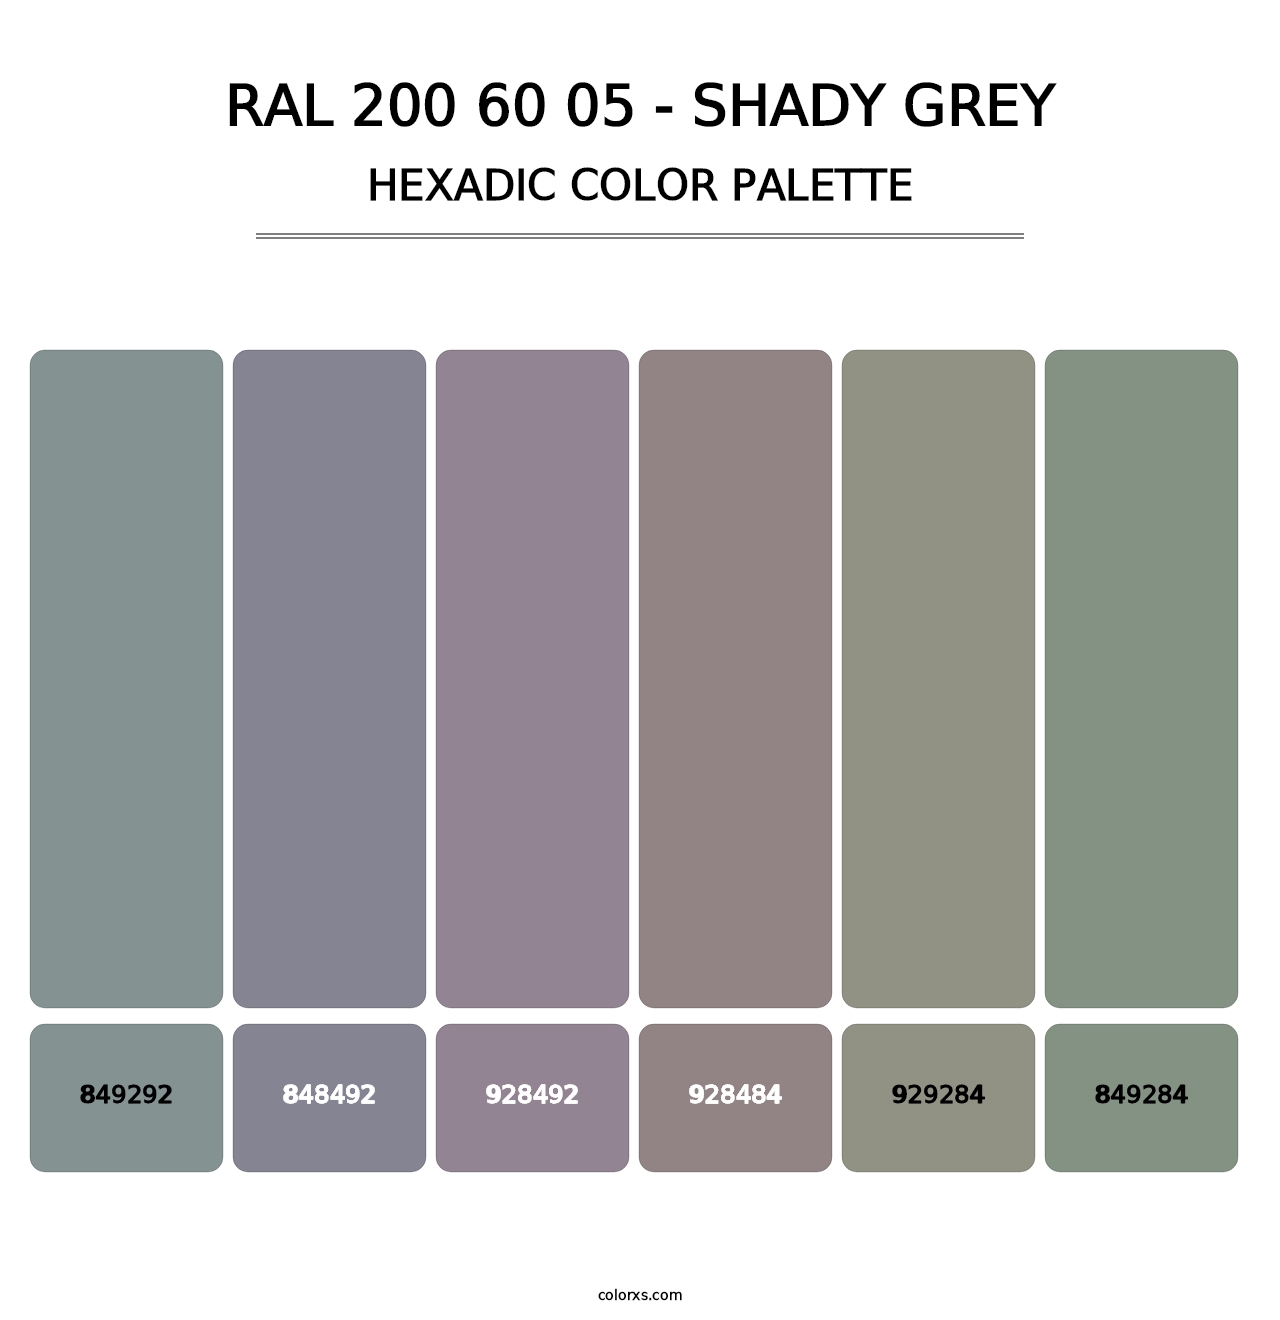 RAL 200 60 05 - Shady Grey - Hexadic Color Palette